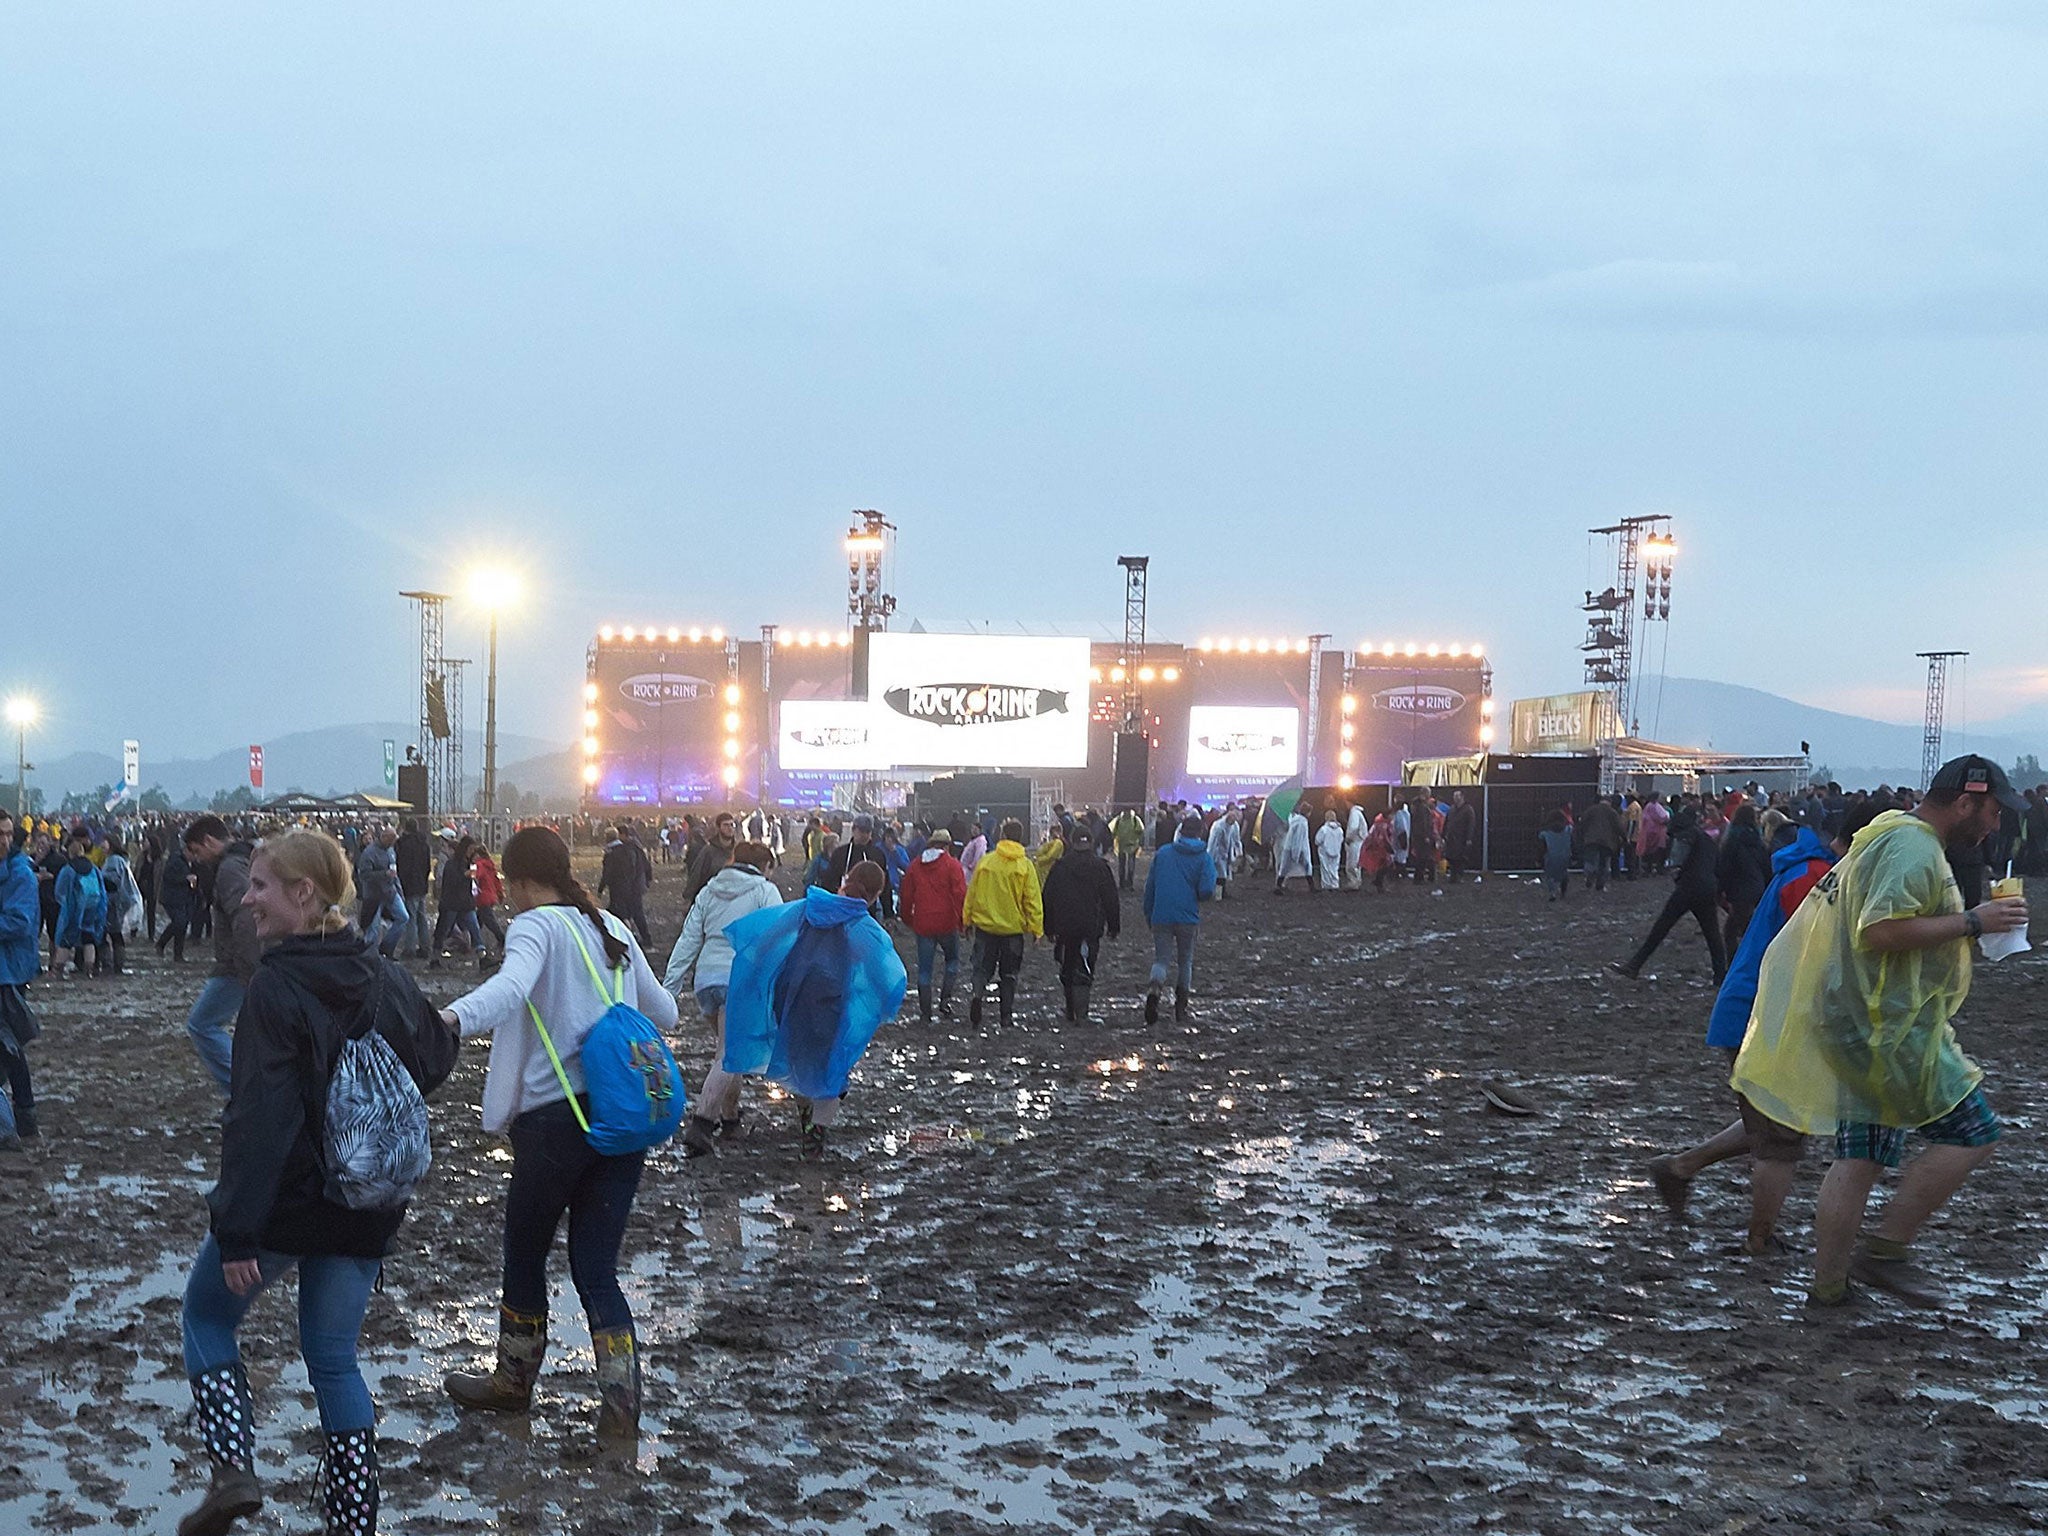 People walk on mud after the venue of the festival 'Rock am Ring' was hit by a storm in Mendig, Germany, 3 June 2016.